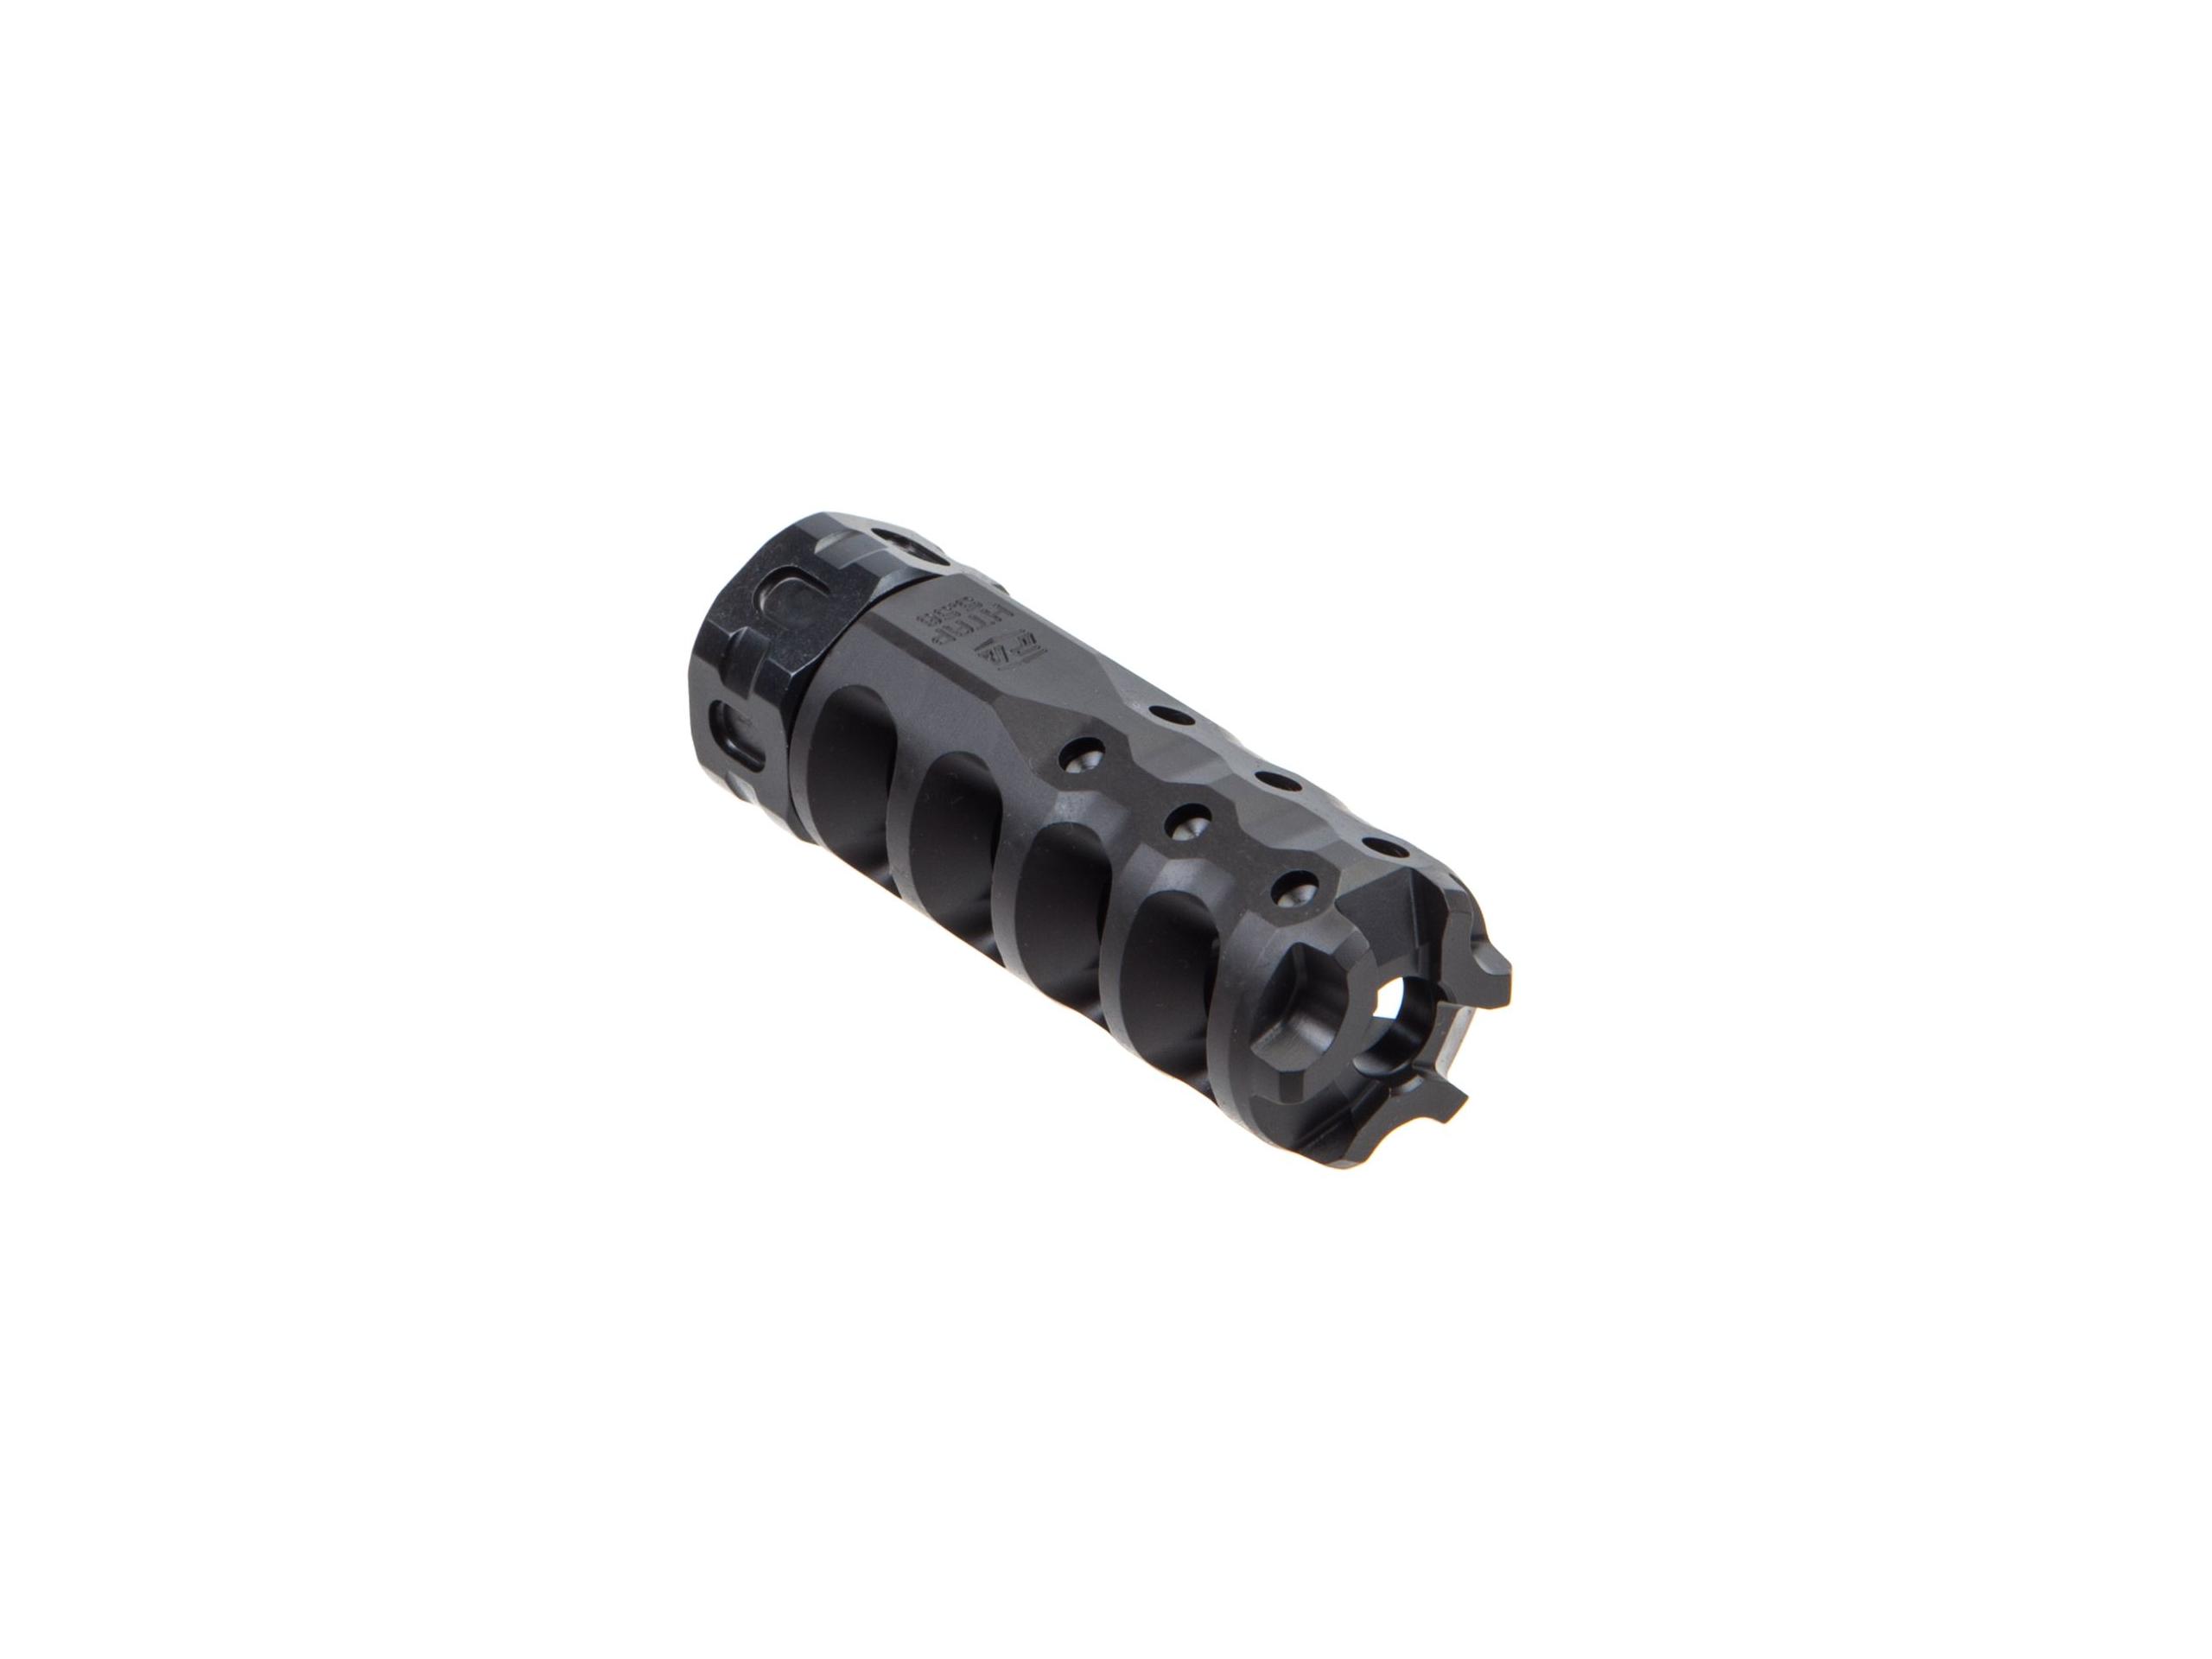 223/556 Muzzle Brake 1/2x28RH Crush Washer Steel Recoil Compensator For Hunting 